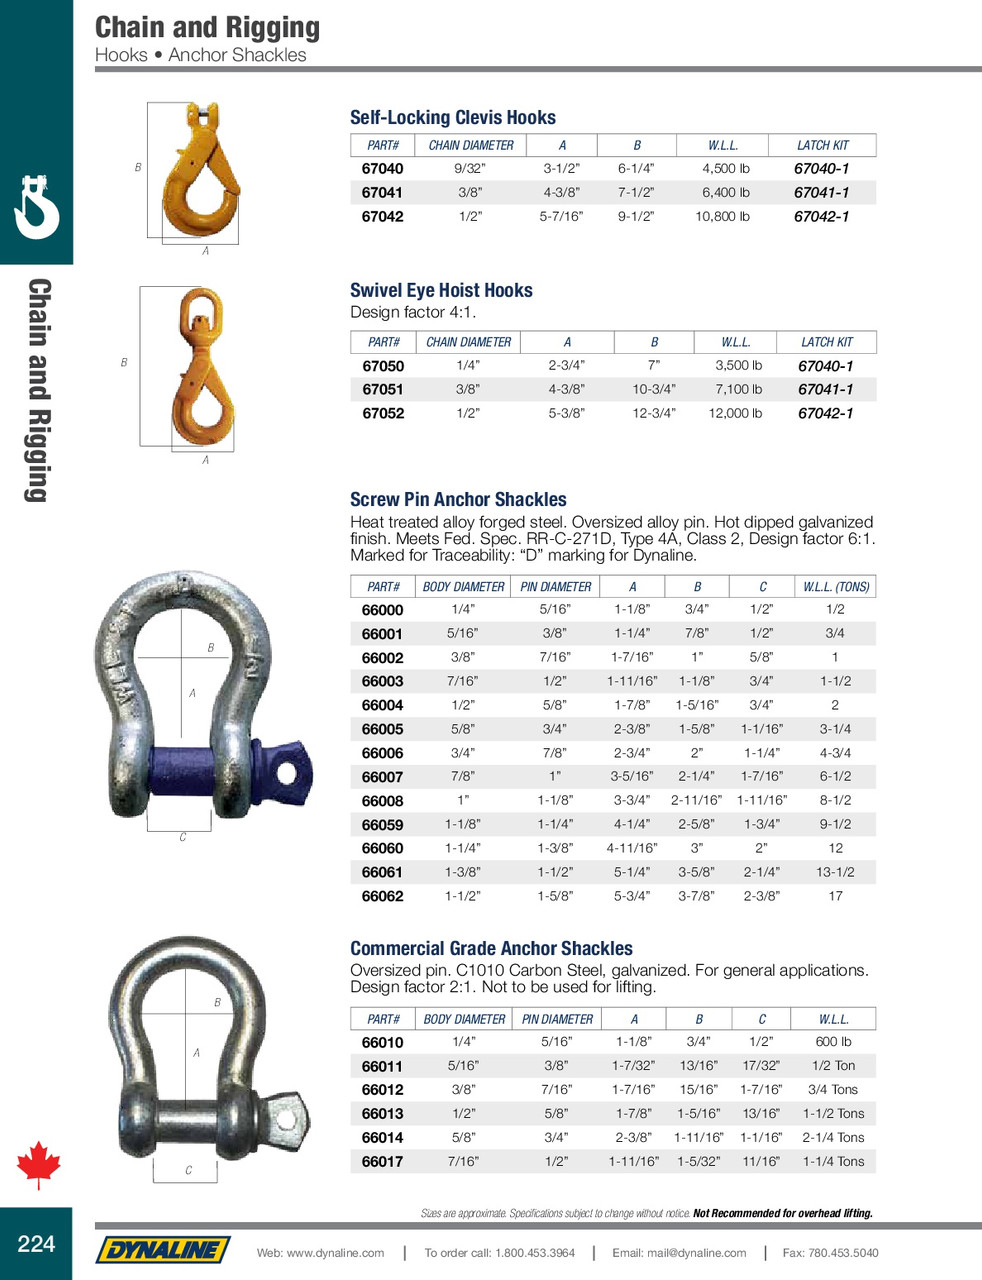 Screw Pin Anchor Shackle 1-1/4"  66060